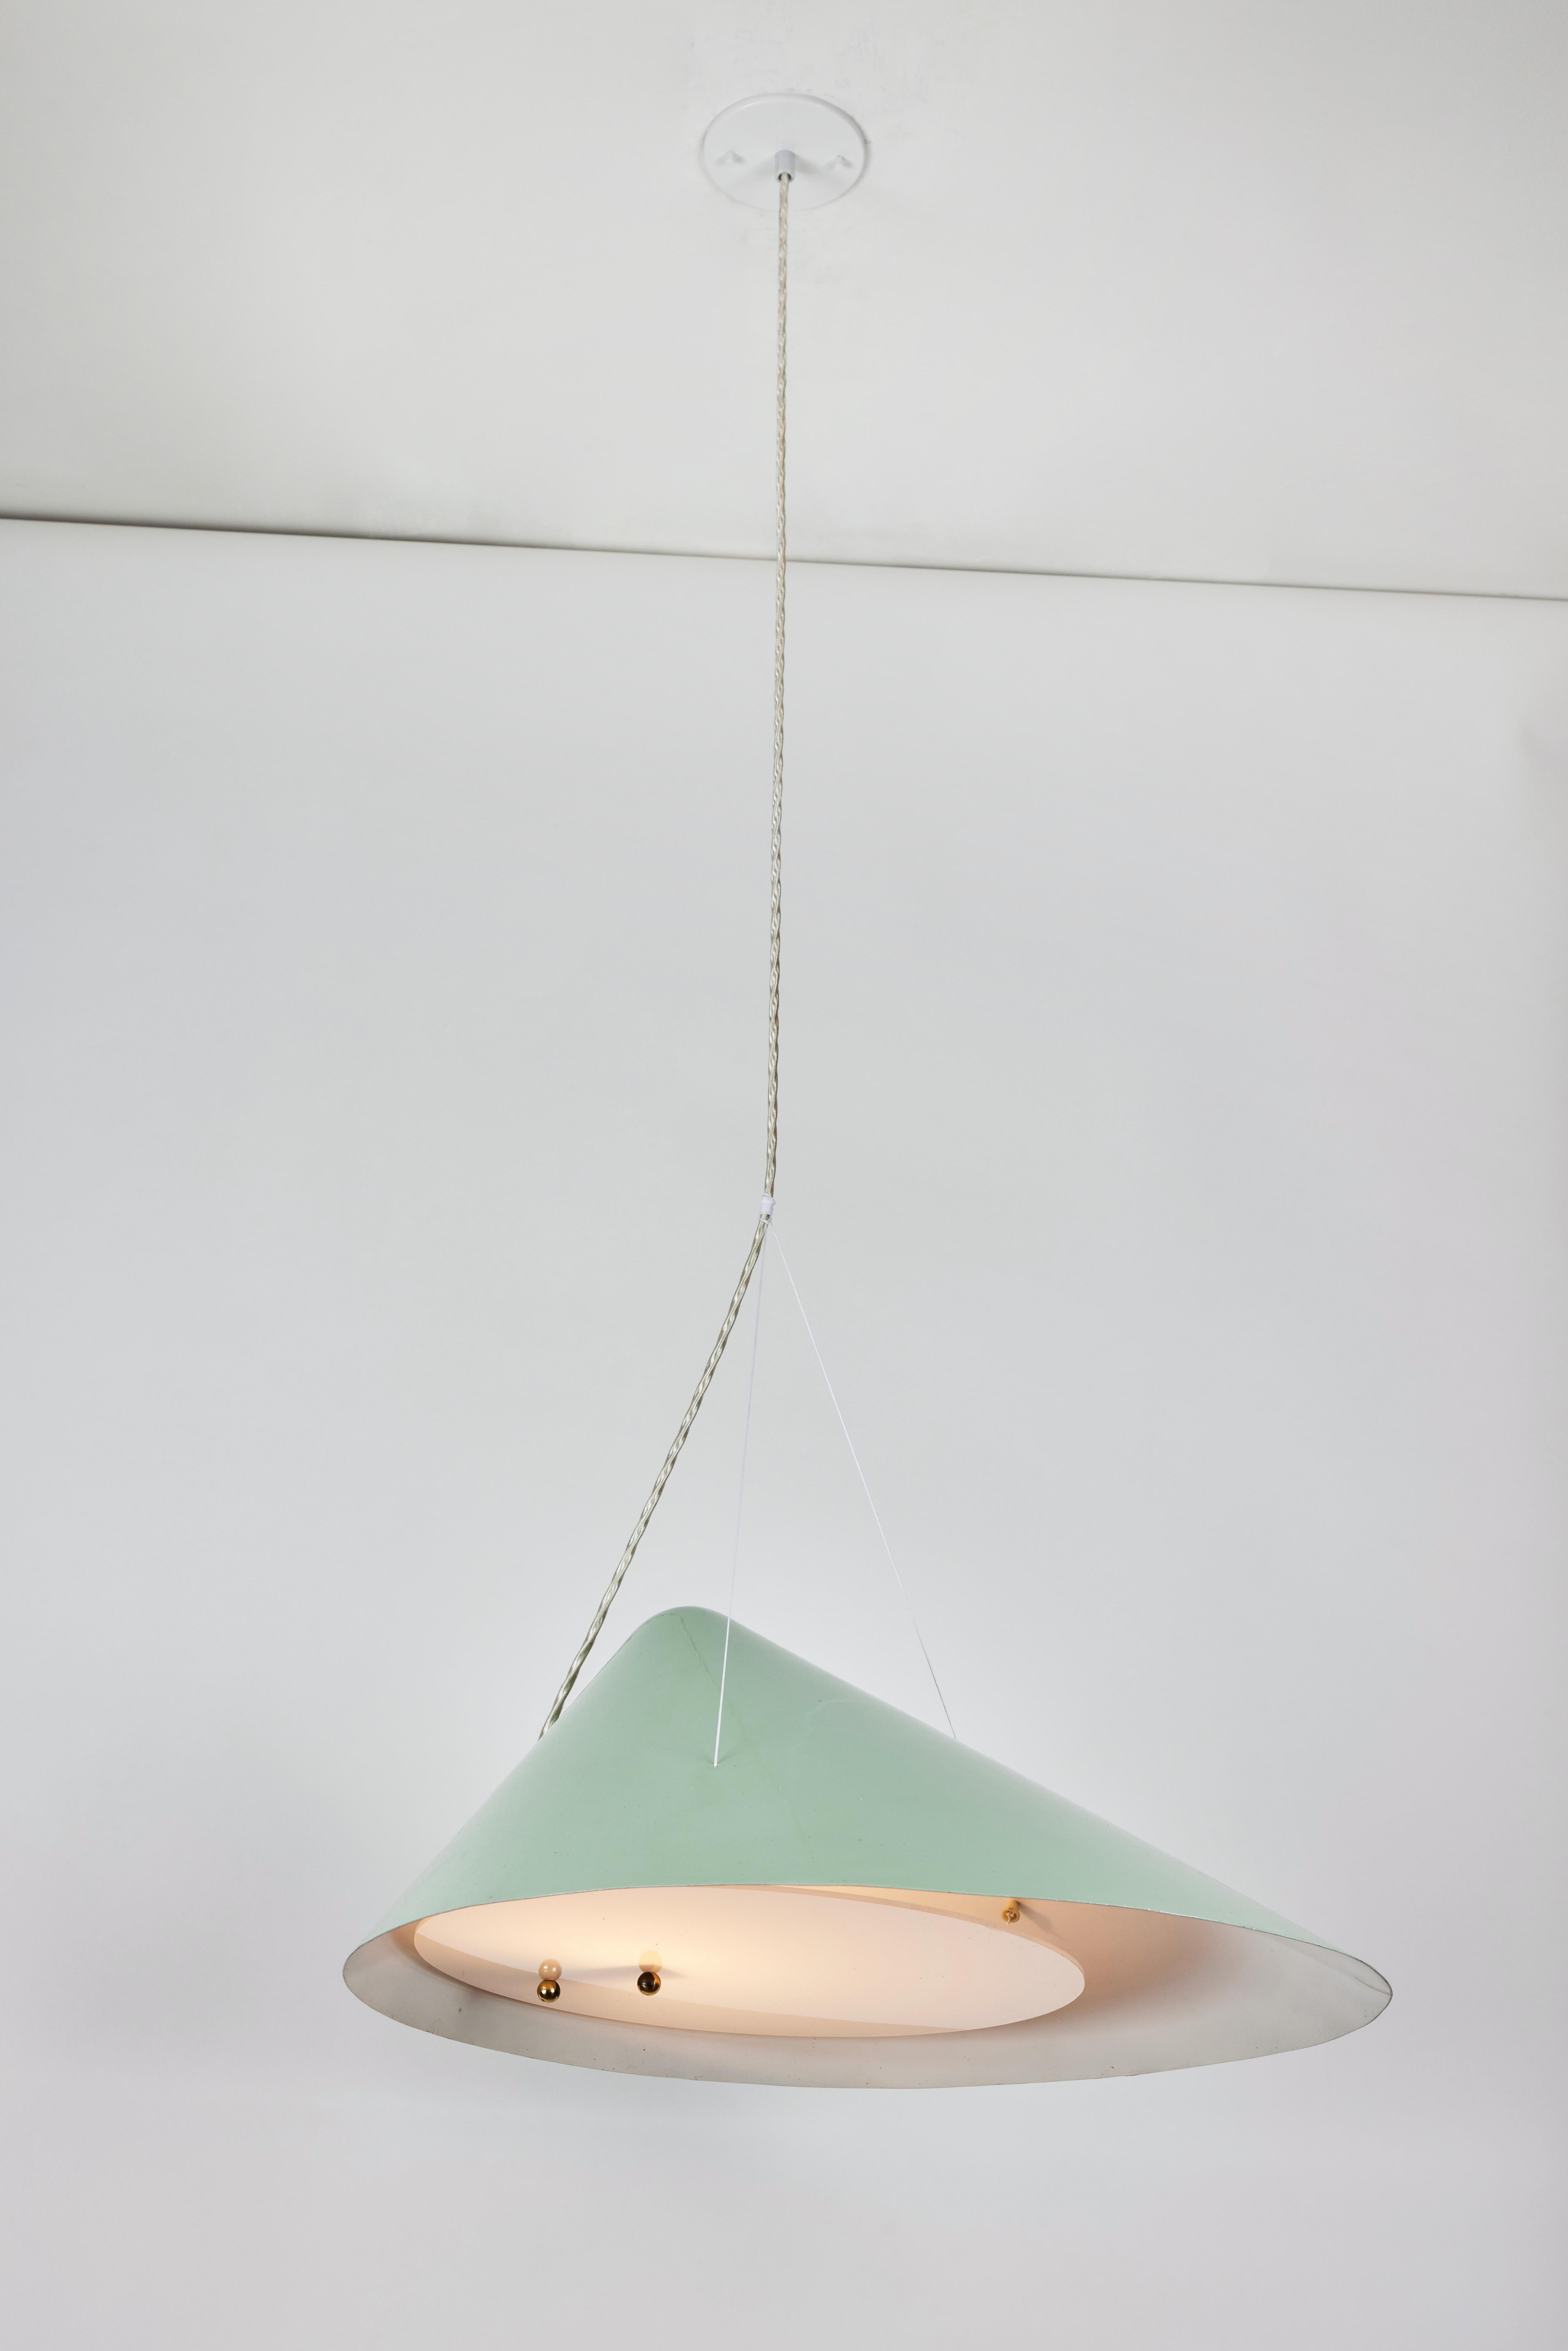 1950s Italian Suspension Lamp Attributed to Ettore Sottsass for Arredoluce 1